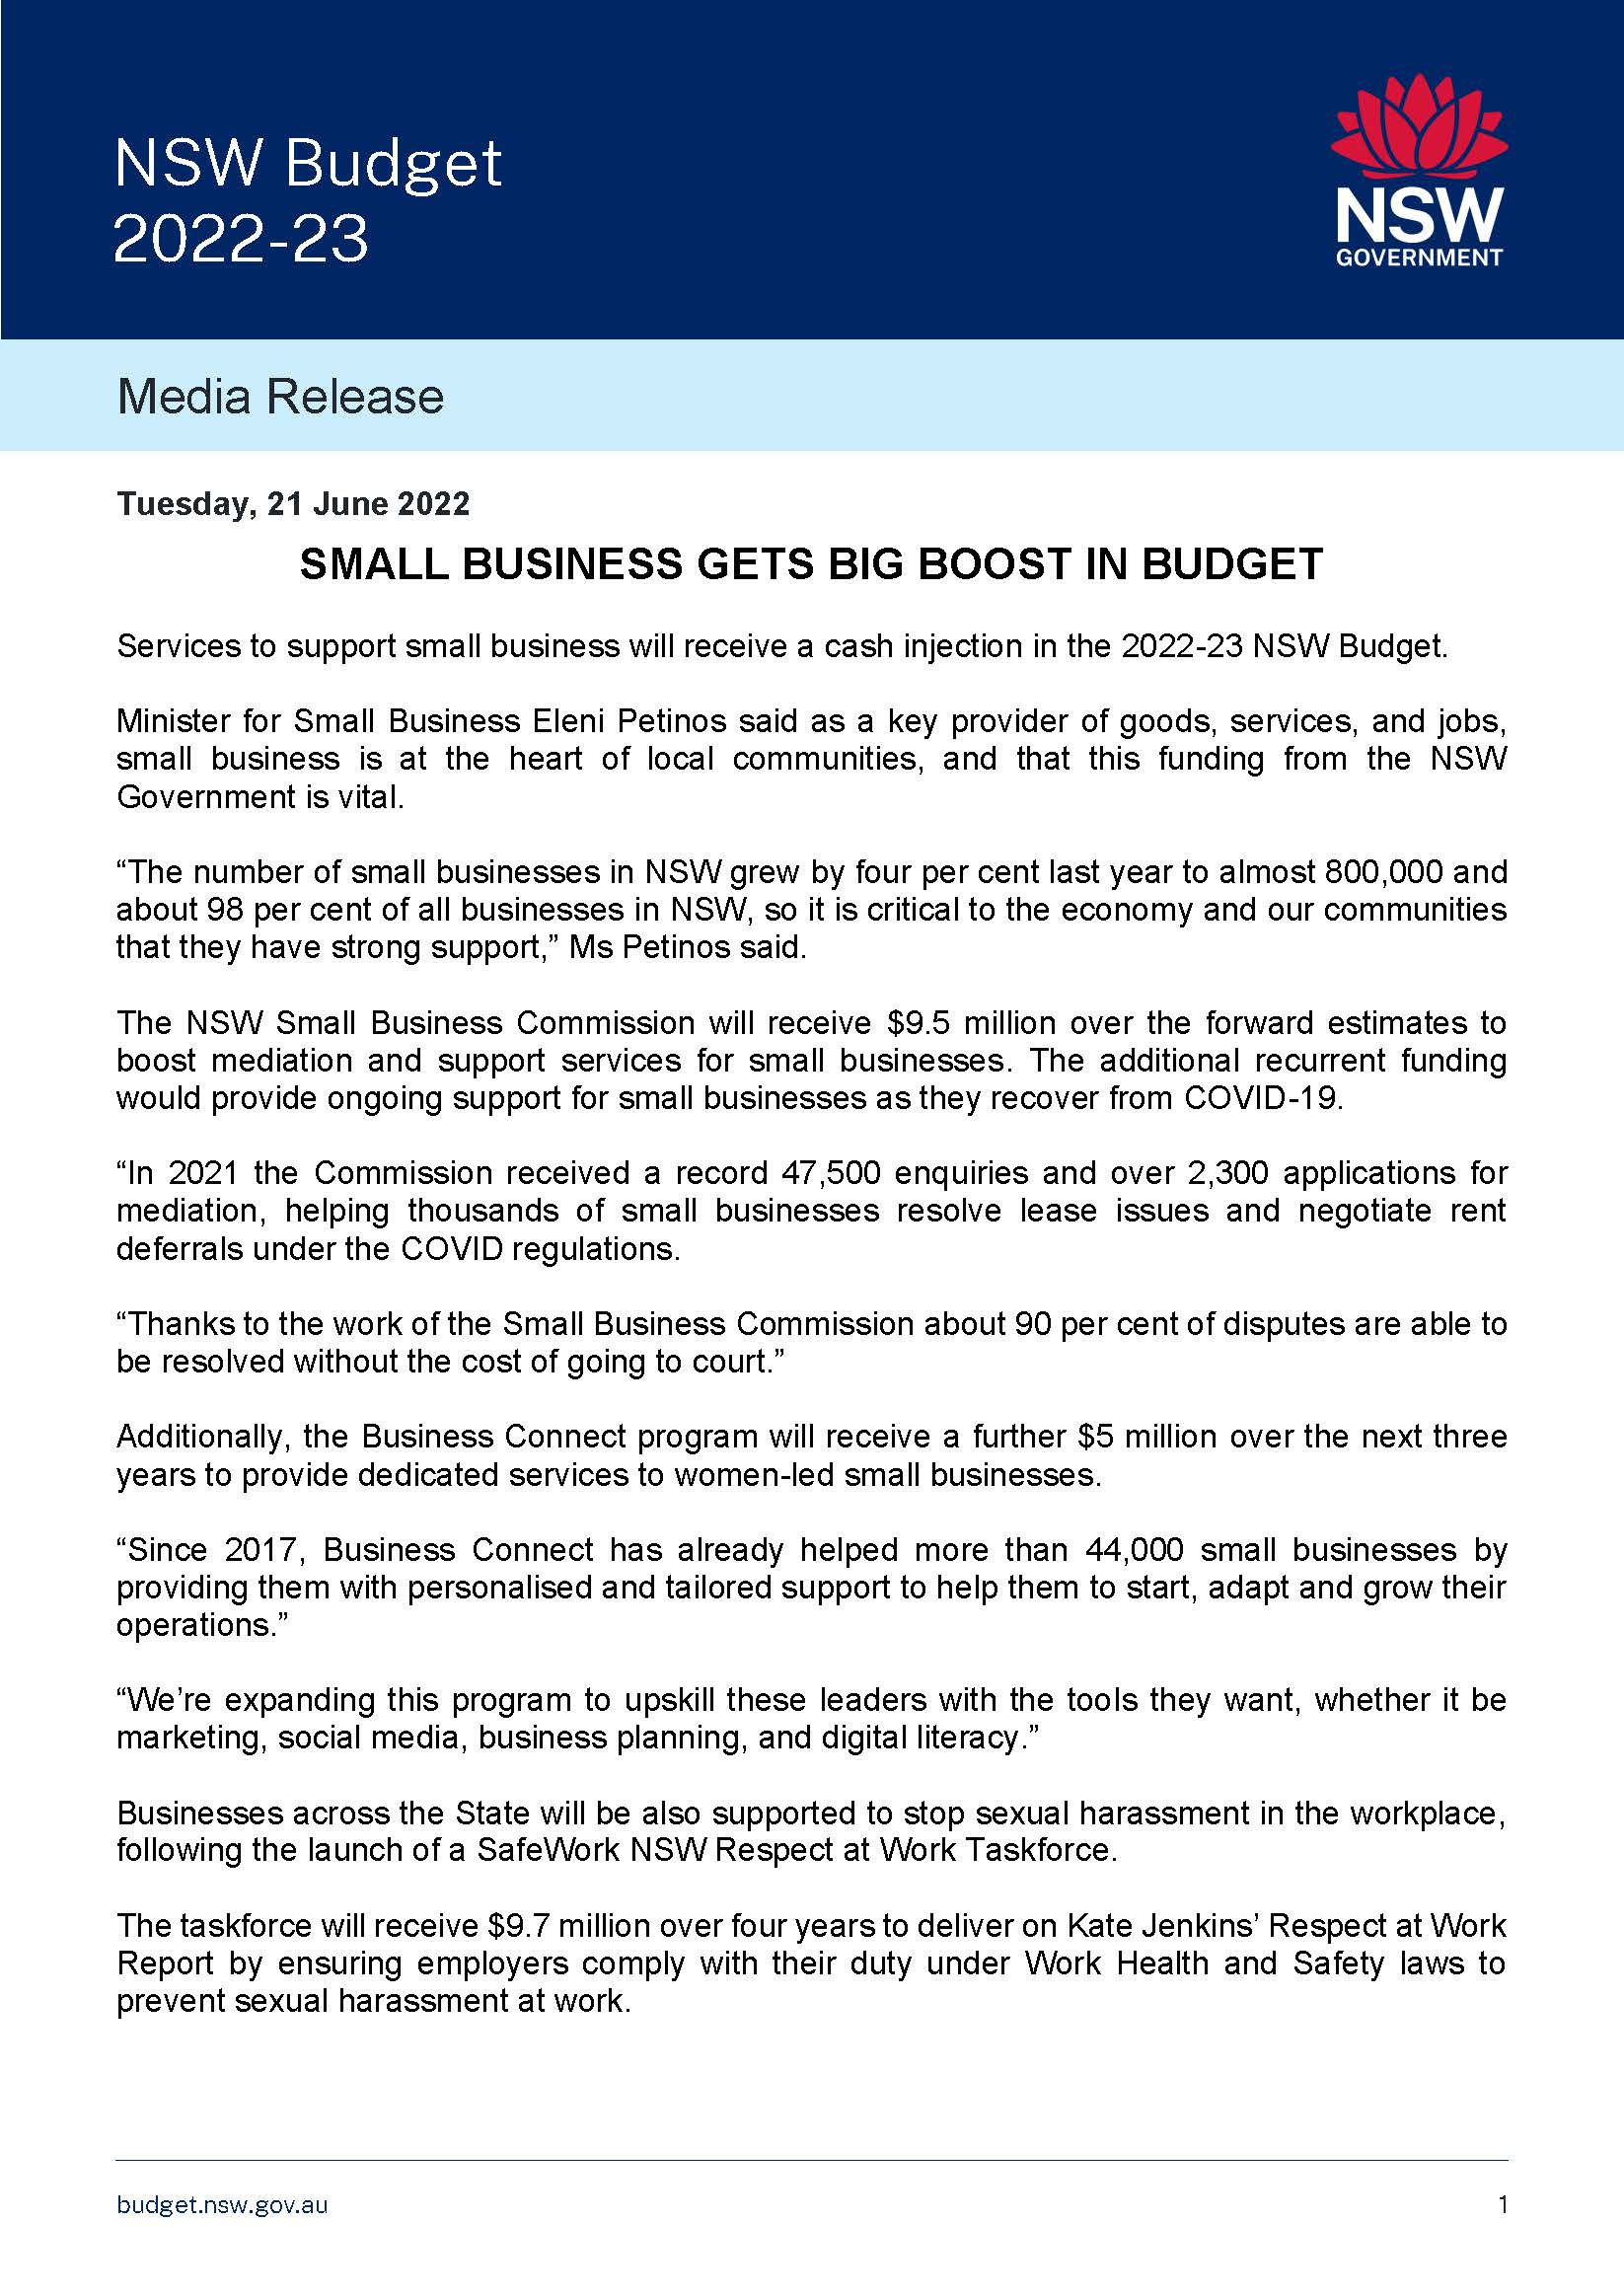 Services to support small business will receive a cash injection in the 2022-23 NSW Budget.  Minister for Small Business Eleni Petinos said as a key provider of goods, services, and jobs, small business is at the heart of local communities, and that this funding from the NSW Government is vital.   